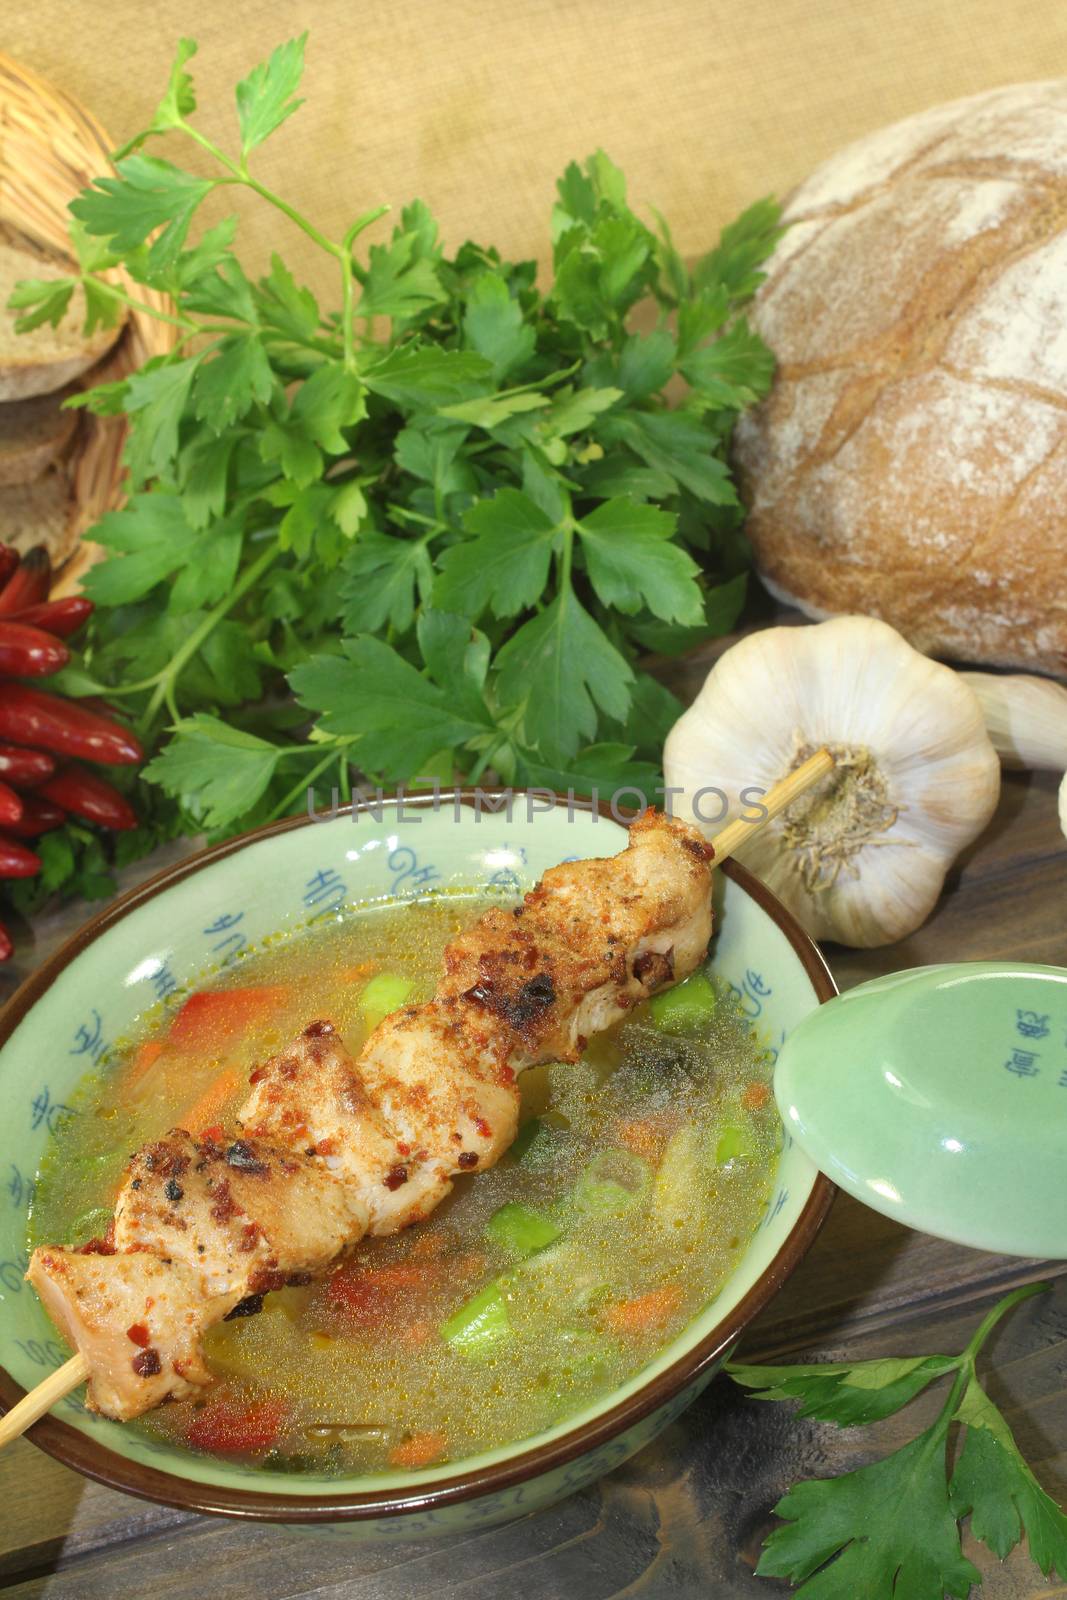 Poultry consomme with chicken skewer, greens and parsley